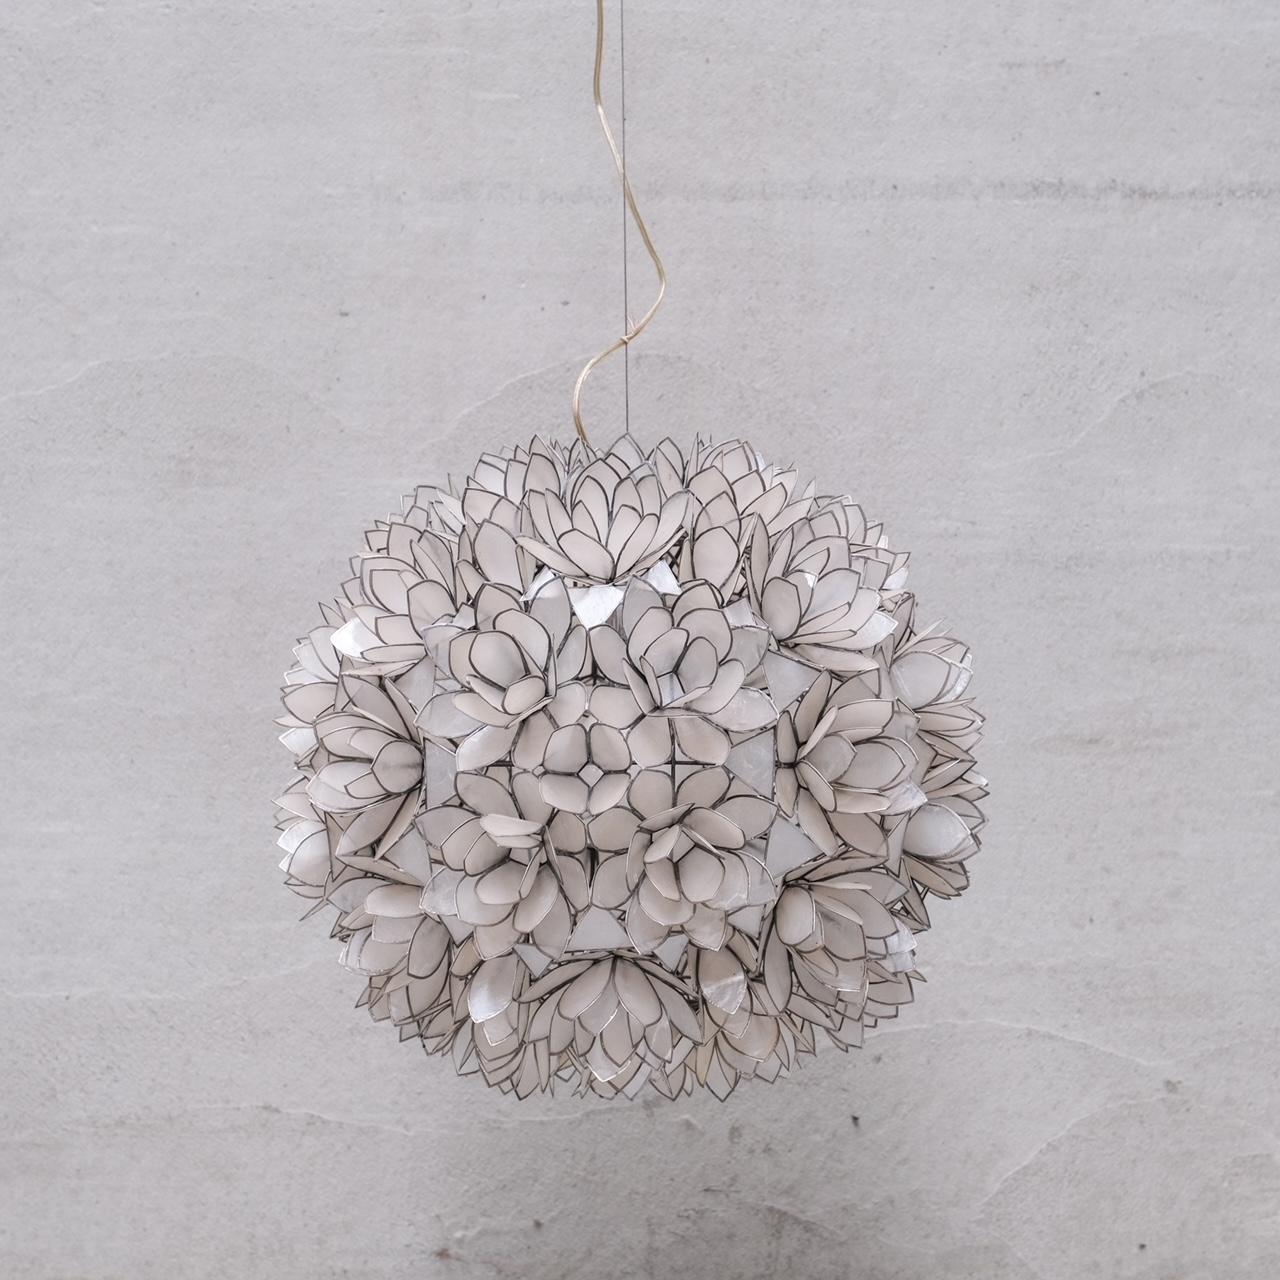 A large shell pendant light or chandelier.

France, c1960s.

Formed from Capiz shell intricately into a flower esque sphere.

Since re-wired and PAT tested.

PRICED AND SOLD INDIVIDUALLY. TWO AVAILABLE AT THE TIME OF LISTING.

Good vintage